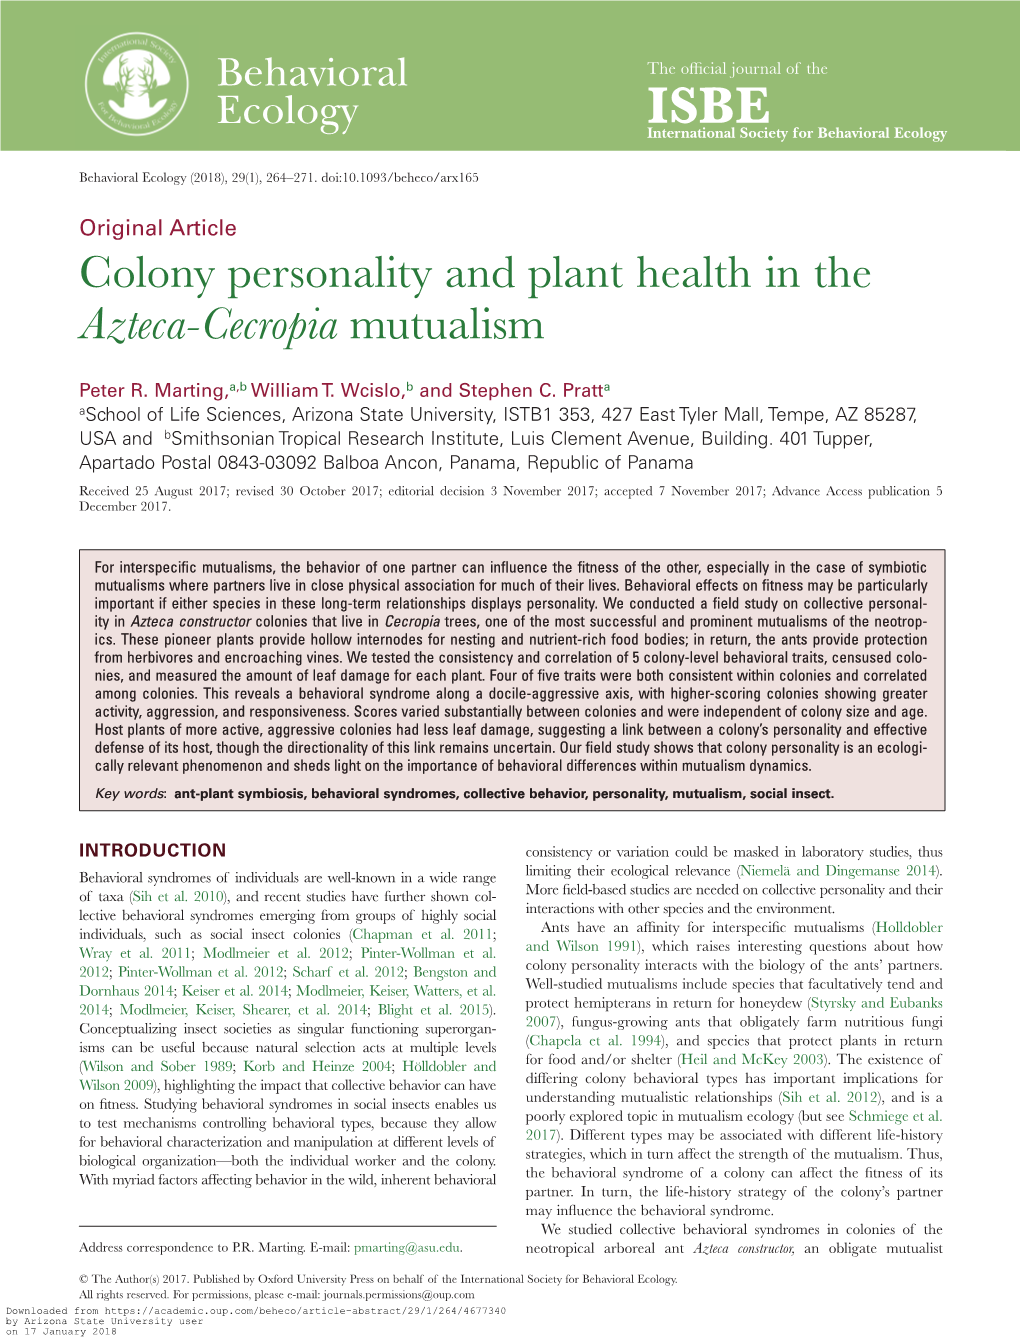 Colony Personality and Plant Health in the Azteca-Cecropia Mutualism